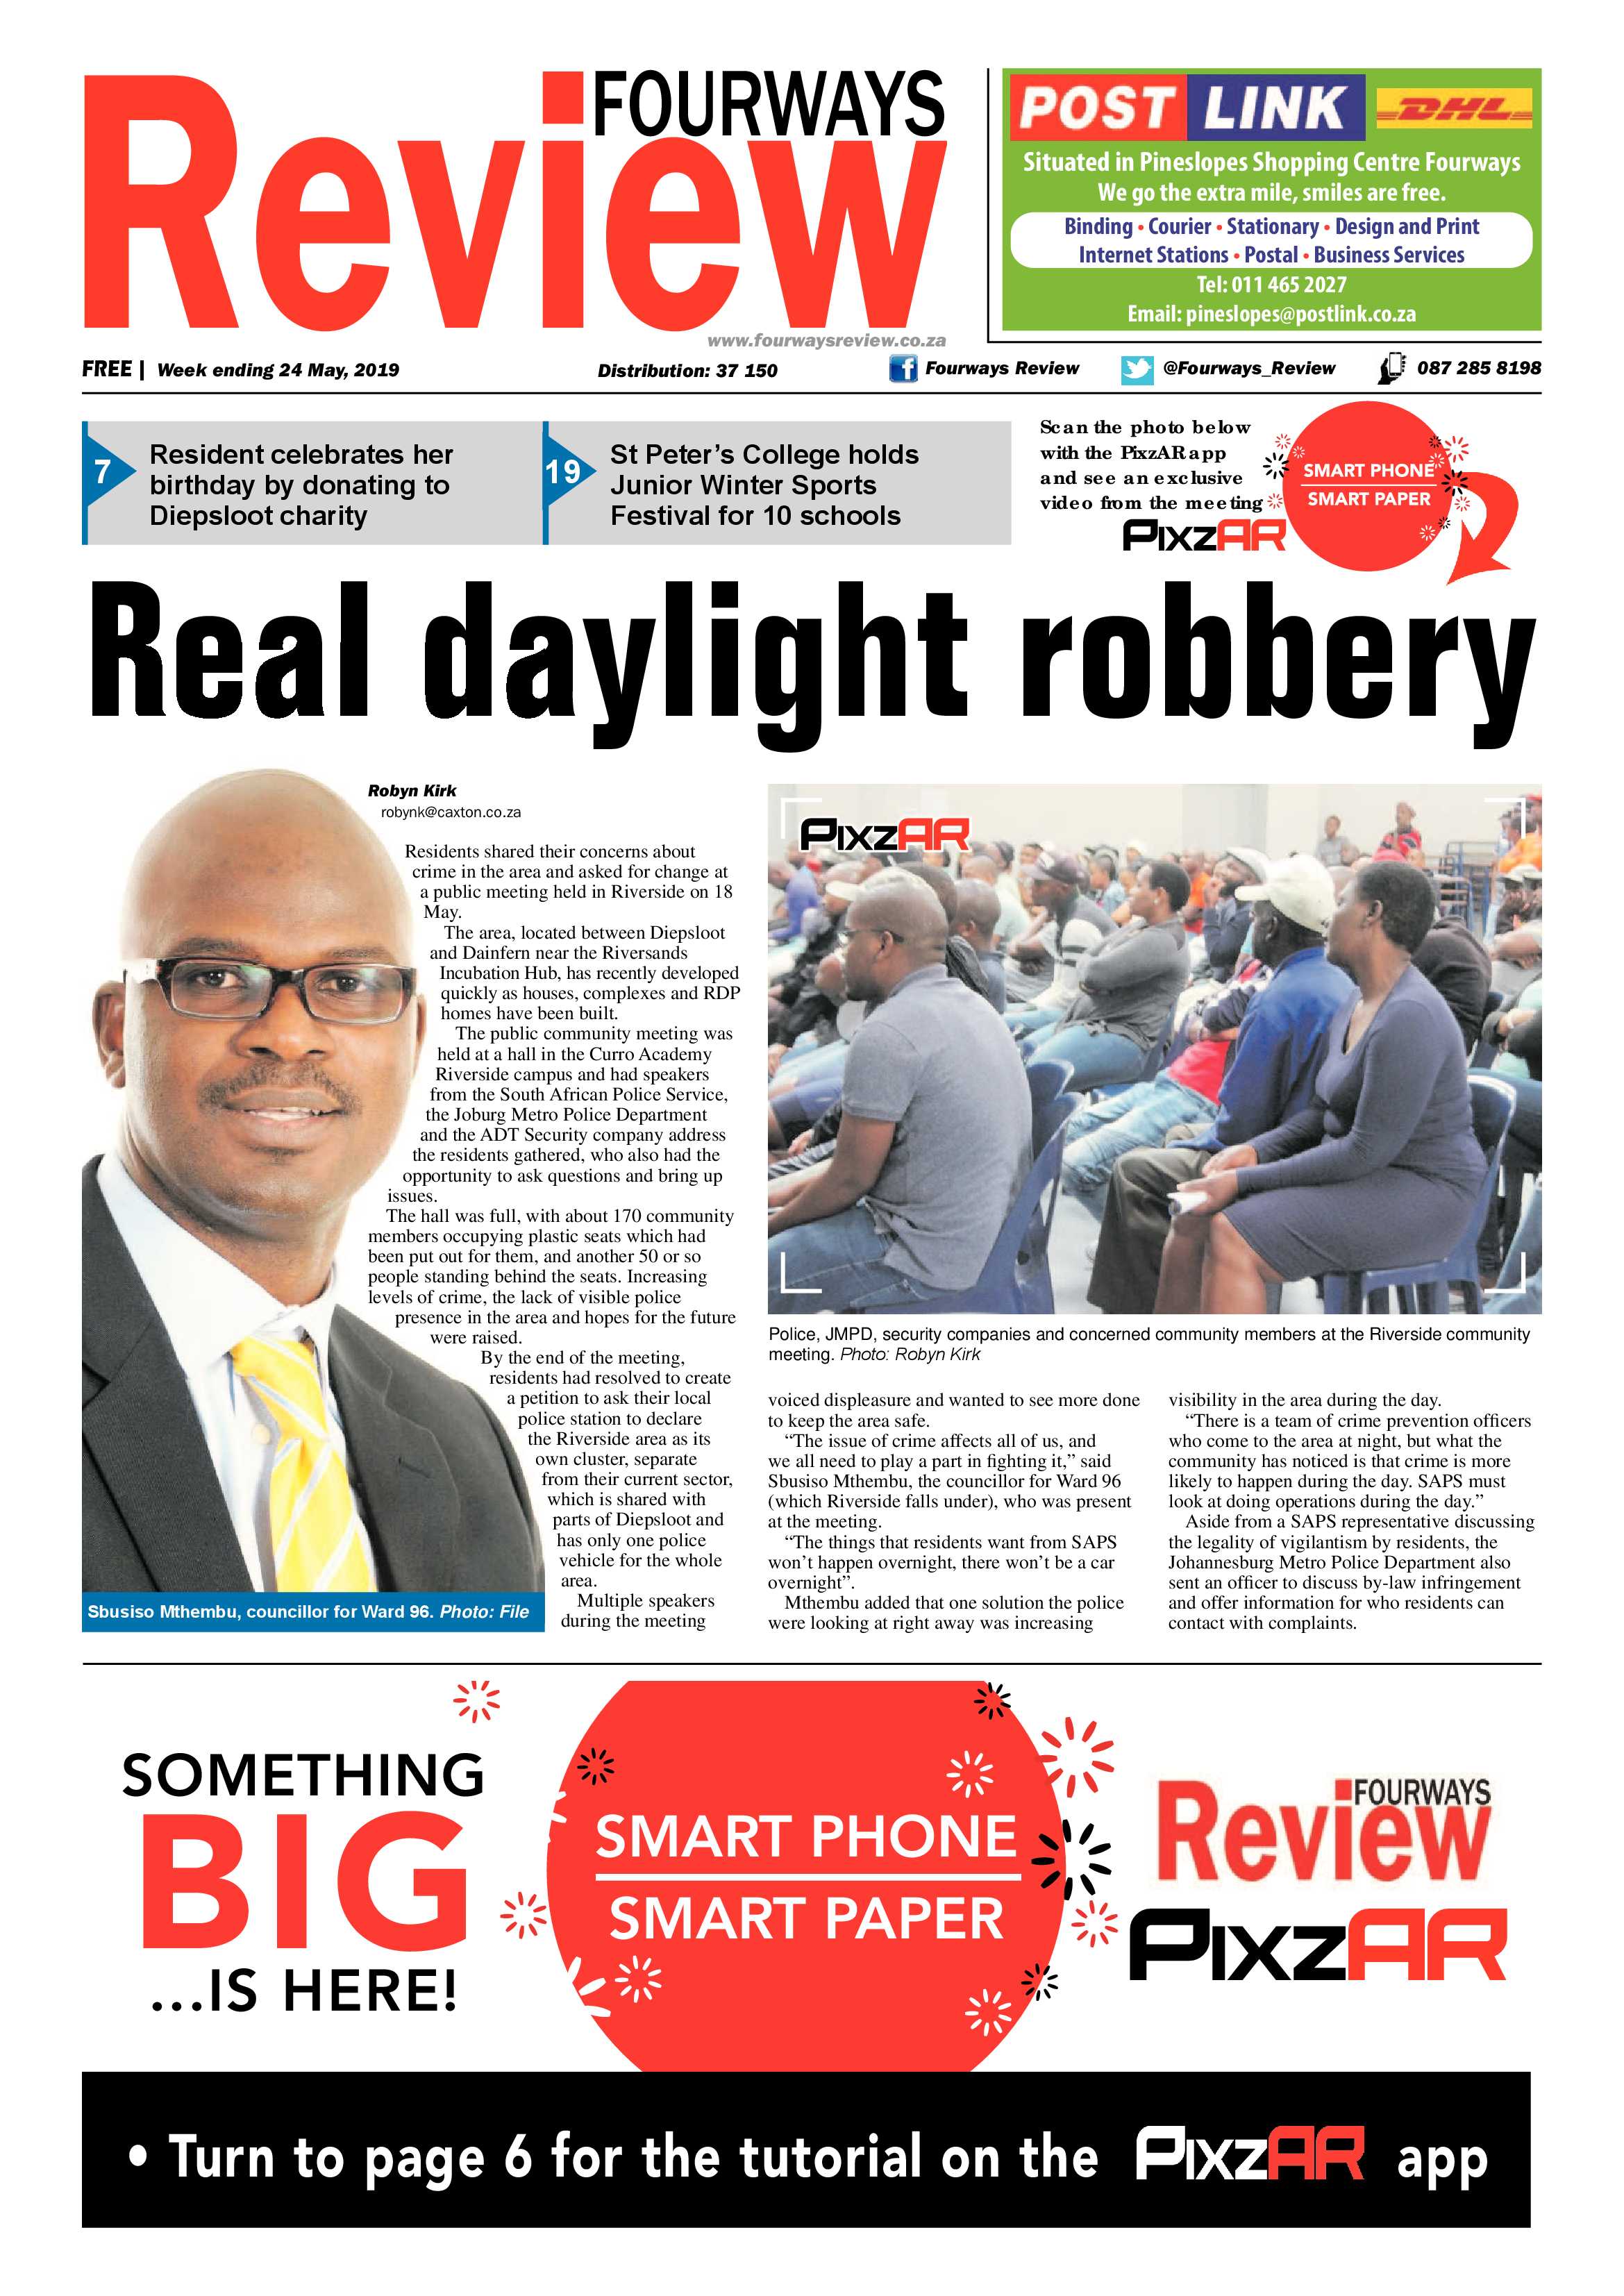 Fourways Review 24 May, 2019 page 1